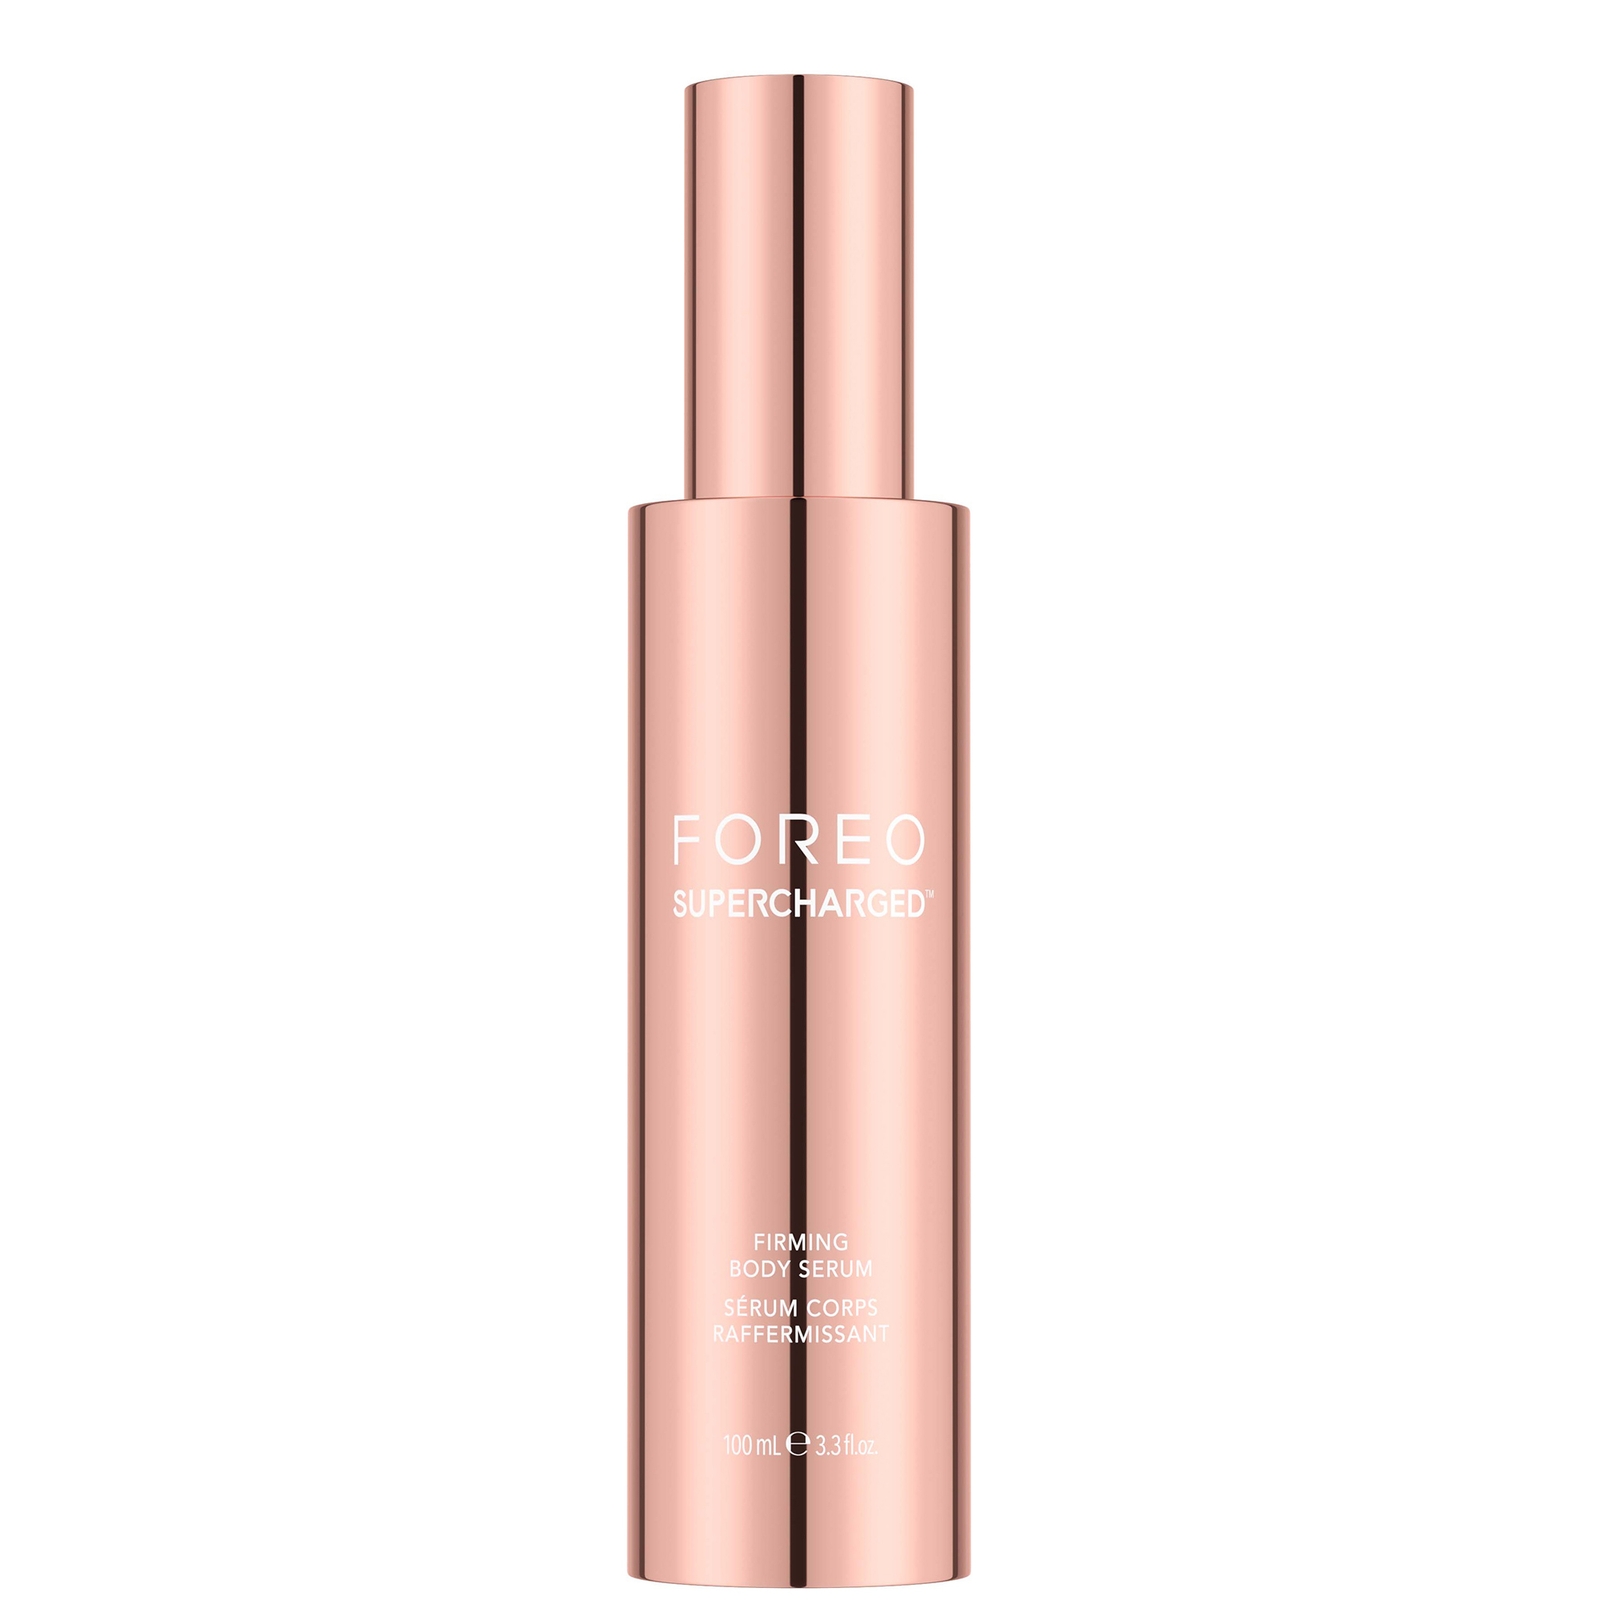 Image of FOREO Supercharged Firming Body Serum 100ml